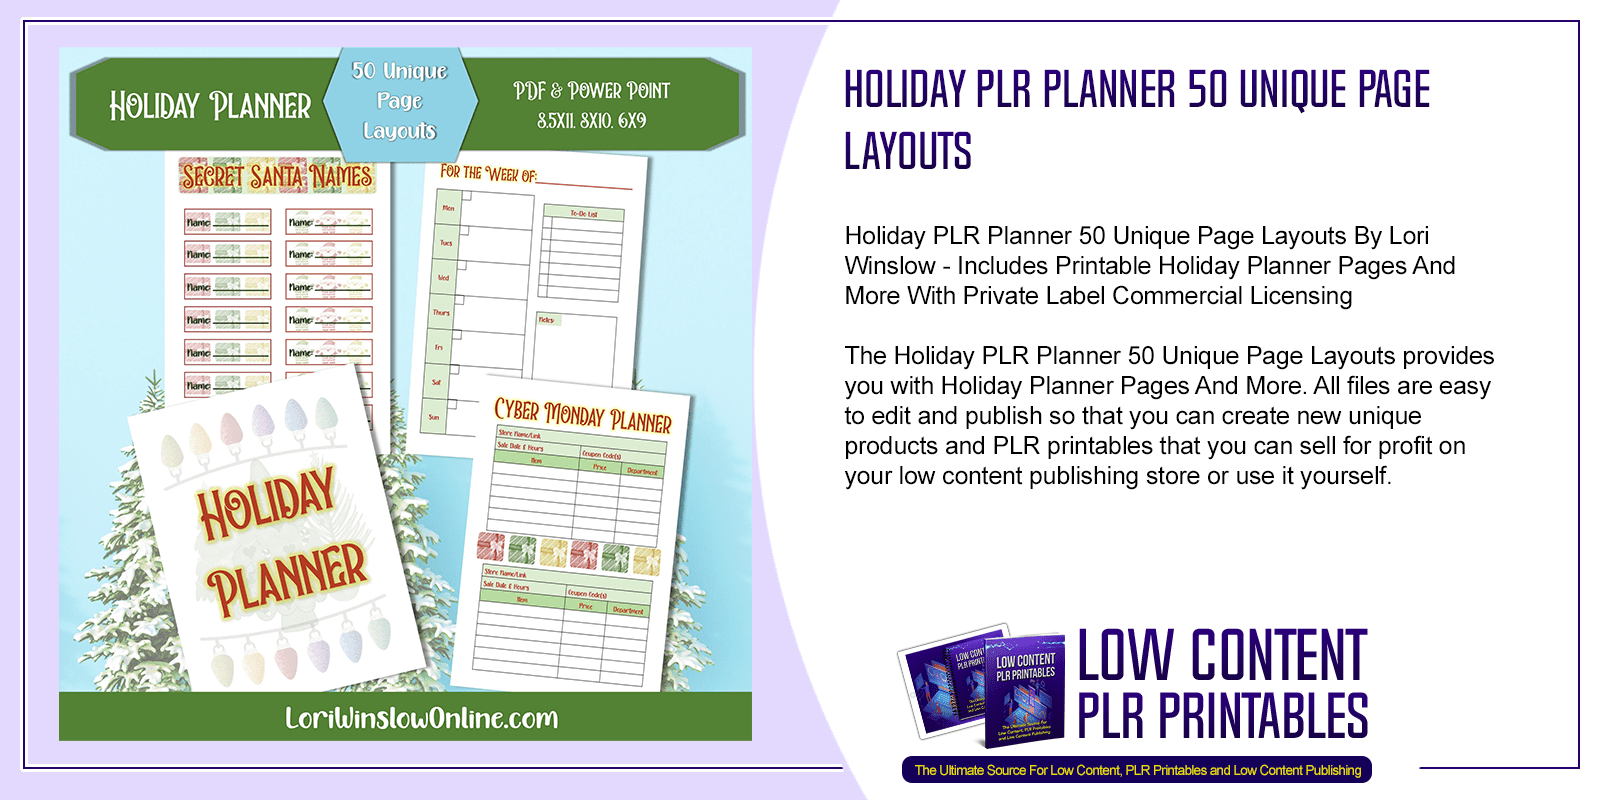 Holiday PLR Planner 50 Unique Page Layouts